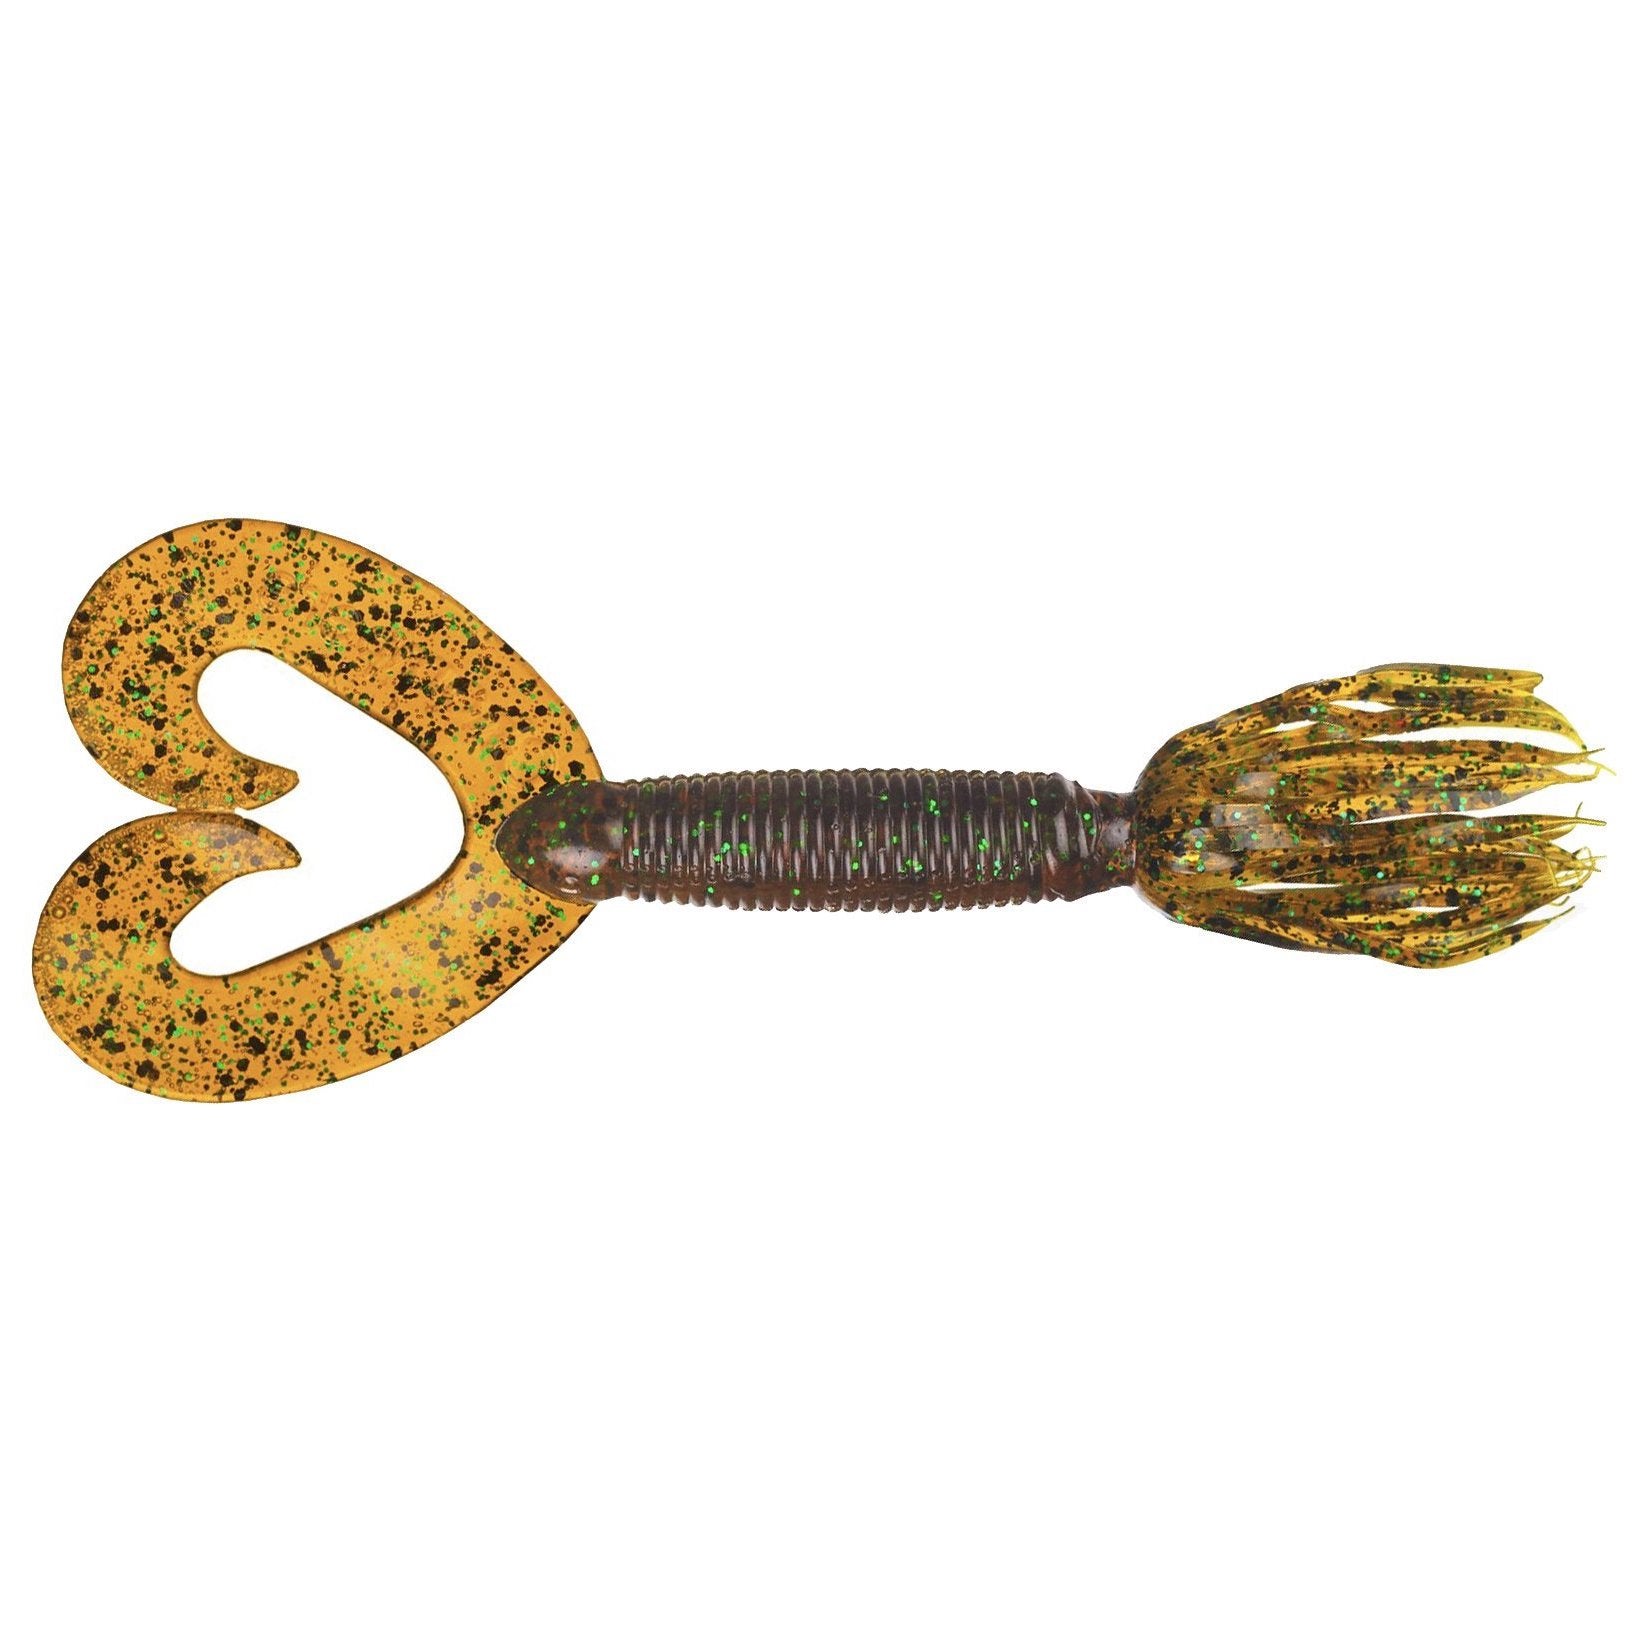 https://cdn.shopify.com/s/files/1/0019/7895/7881/products/chompers-skirted-twin-tail-grub-chompers-softbaits-grubs-large-5-rootbeer-green-3.jpg?v=1621449078